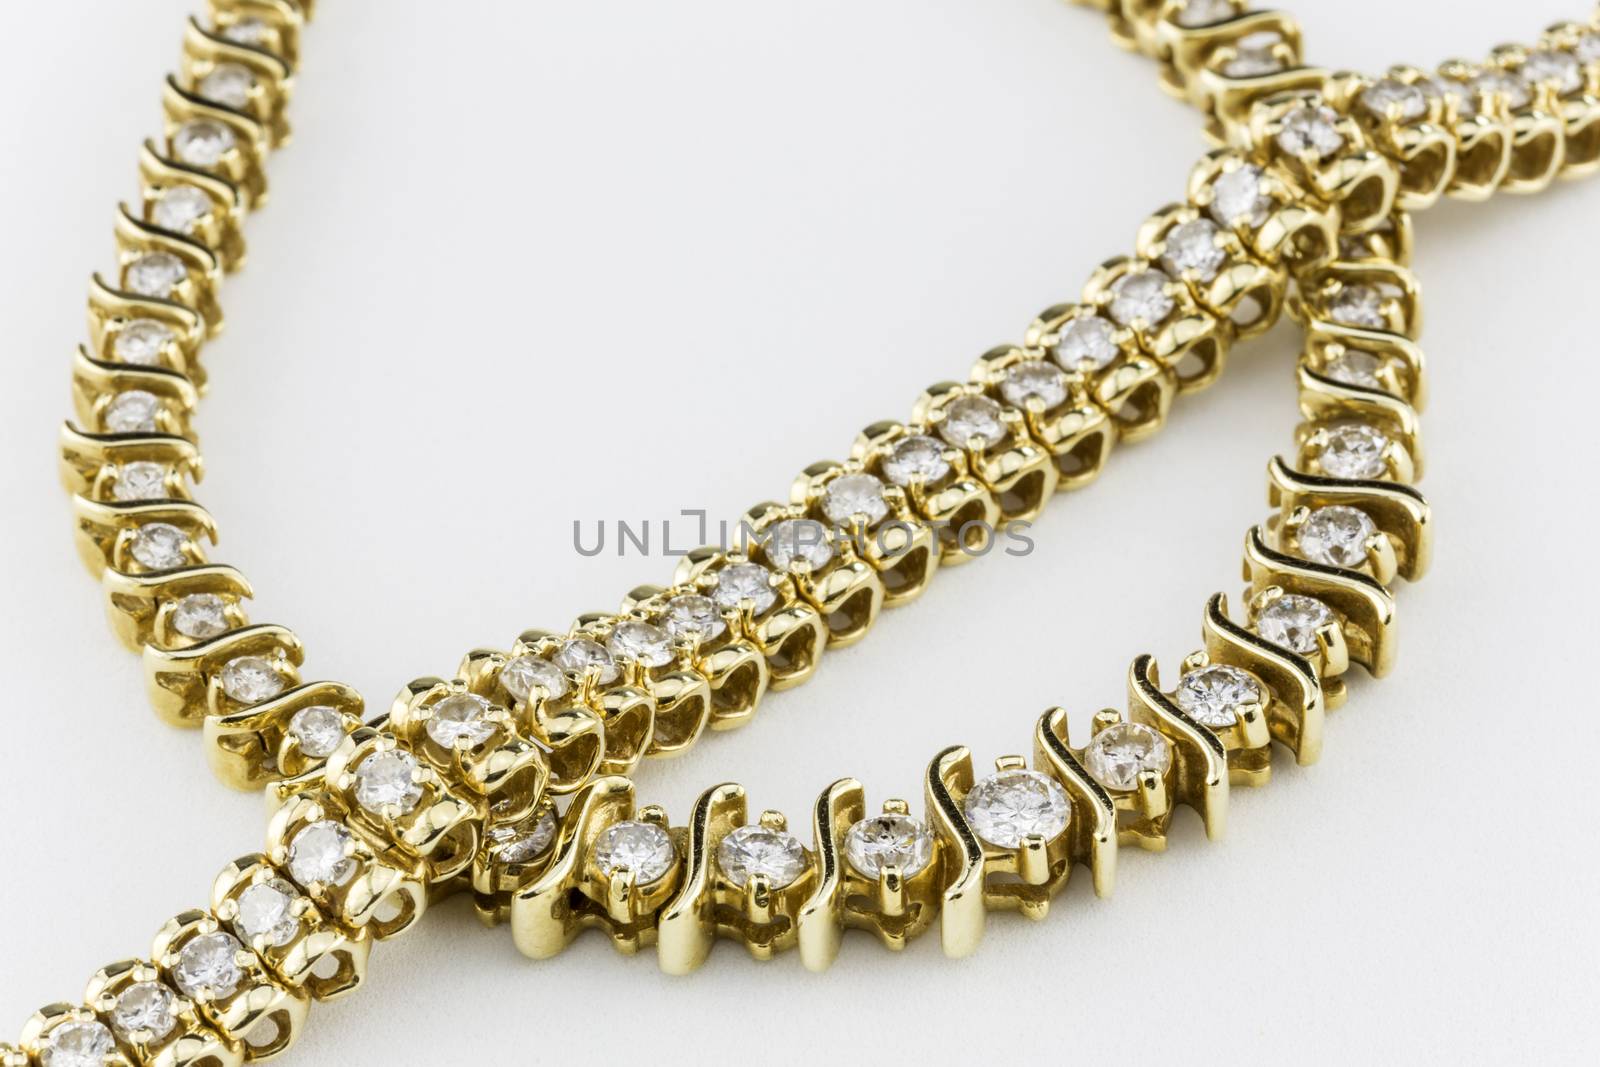 Beautiful and dazzling diamond necklace and bracelet with gold.